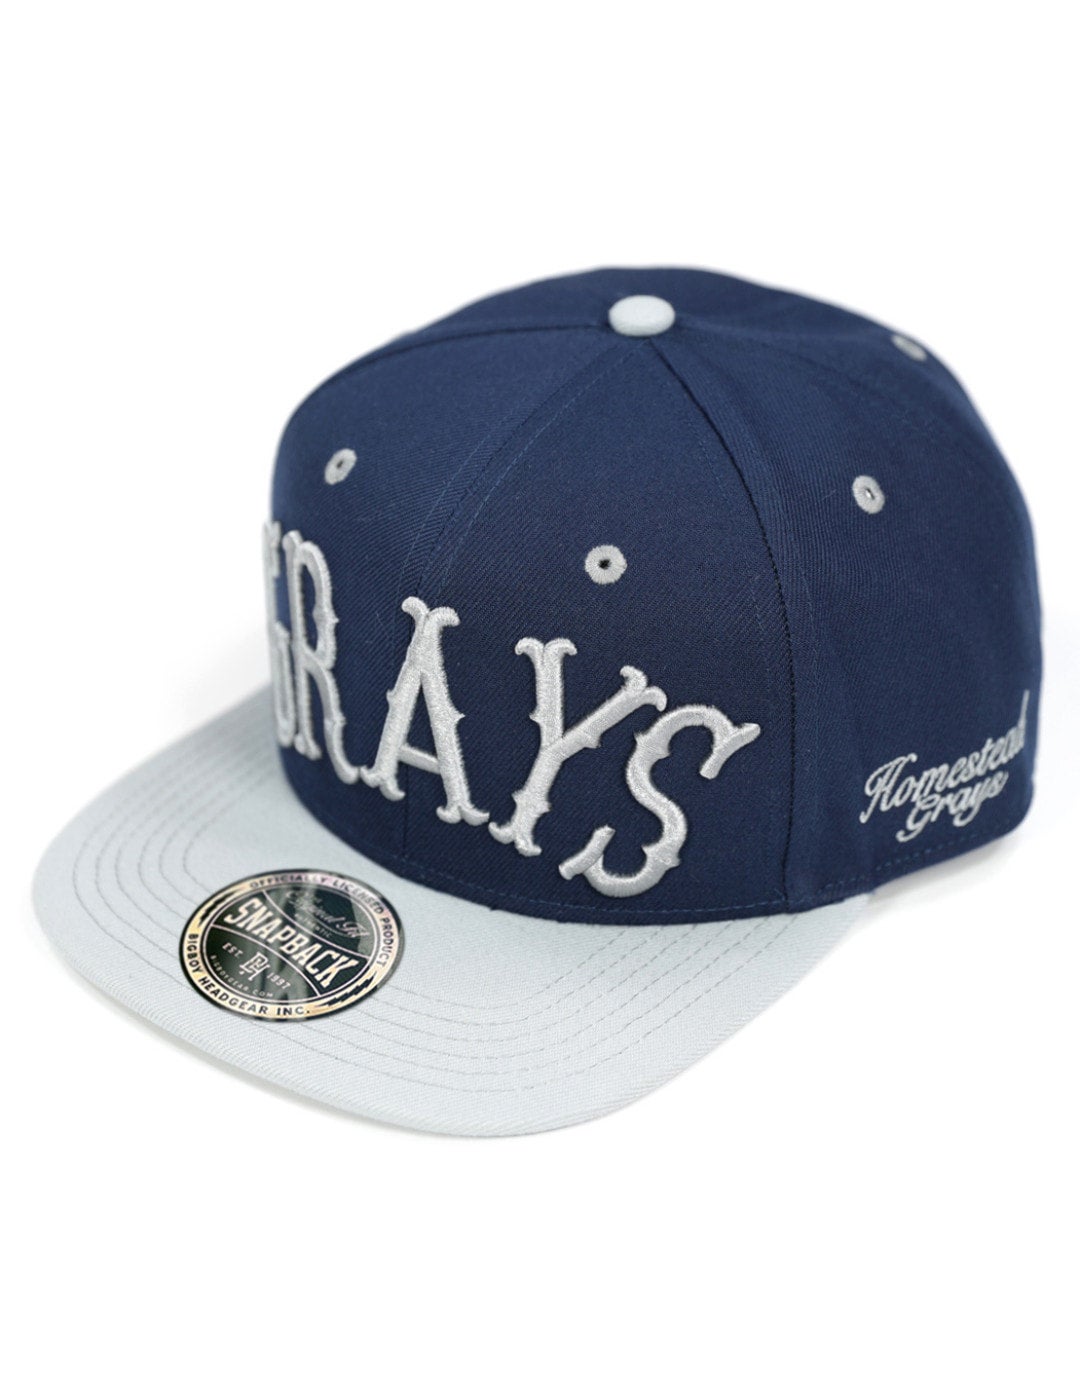 Homestead Grays Snapback  B.L.A.C.K (Negro League, Buffalo Soldiers and  Tuskegee Airmen apparel)